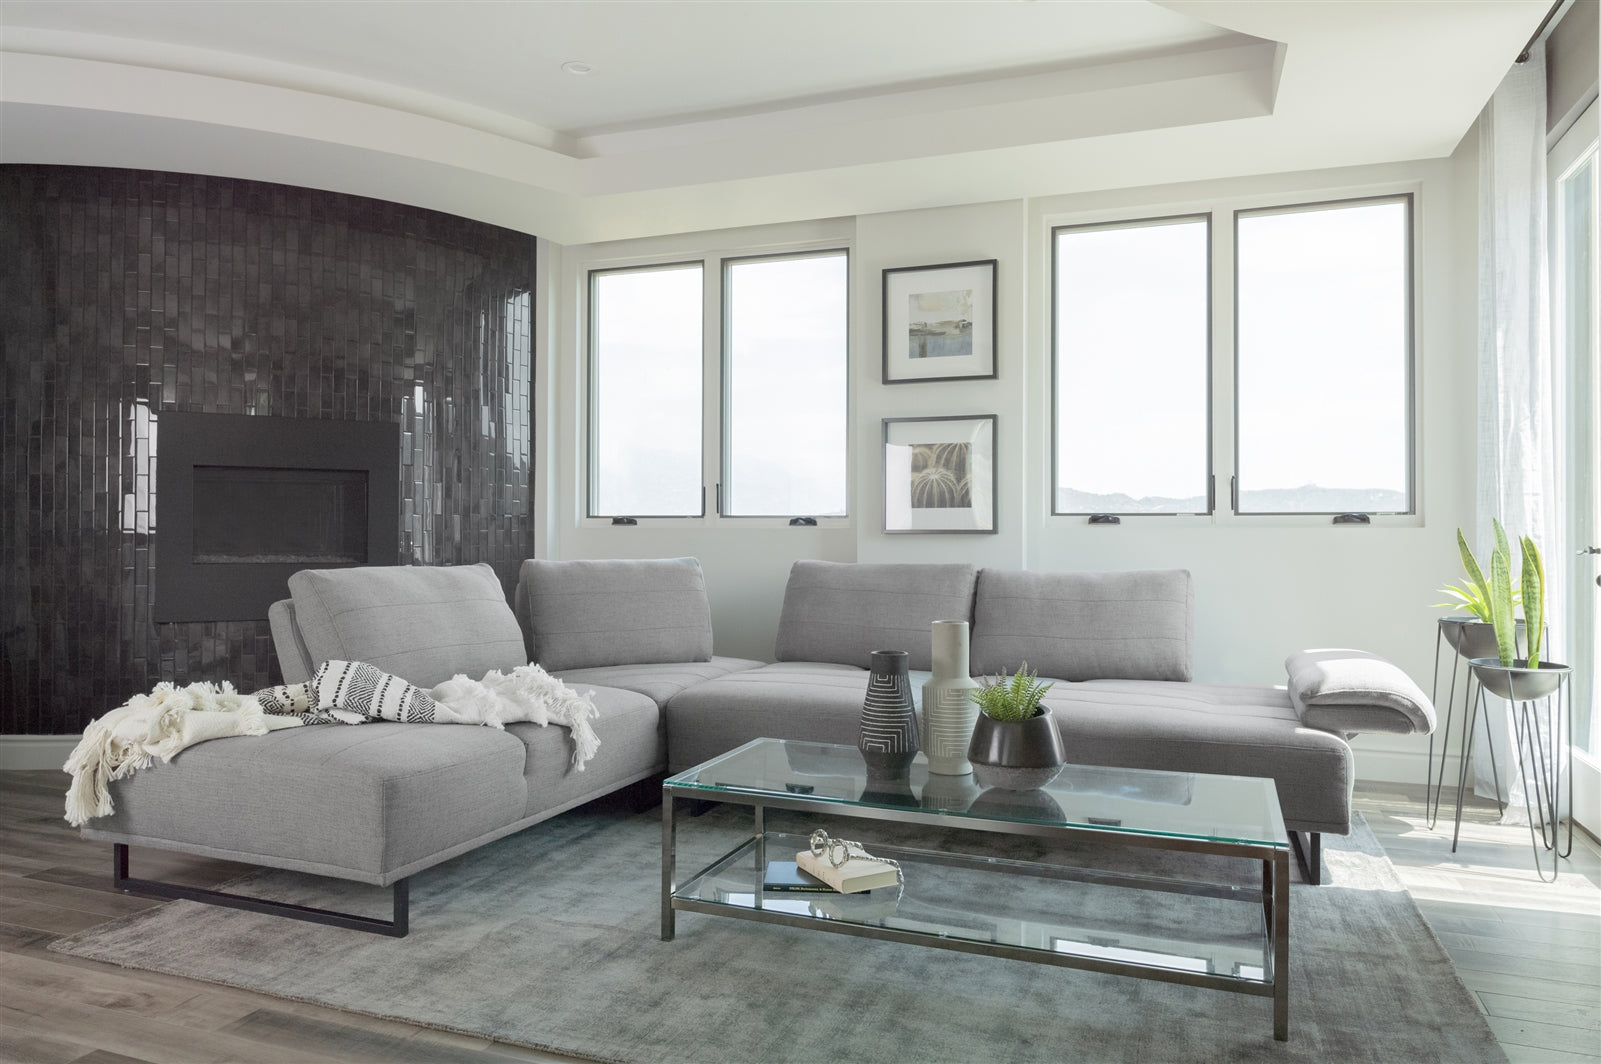 Arden Modern Upholstered Sectional in Taupe Woven Fabric